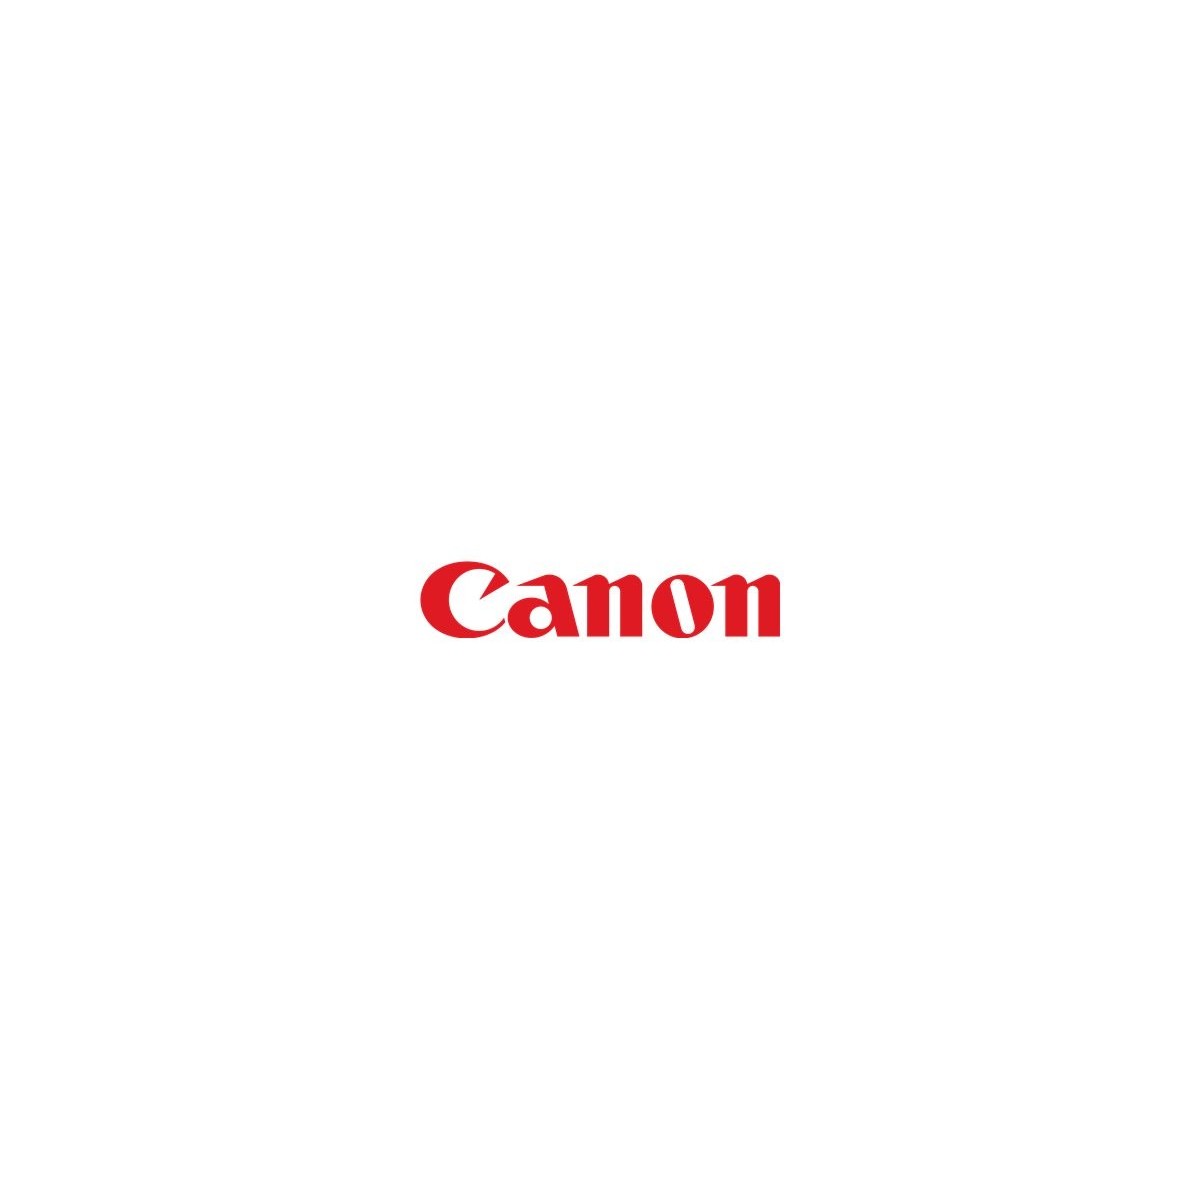 Canon 1356A001AA - Original - 40000 pages - Laser printing - Black - CLC7/7L/8/900/920/950